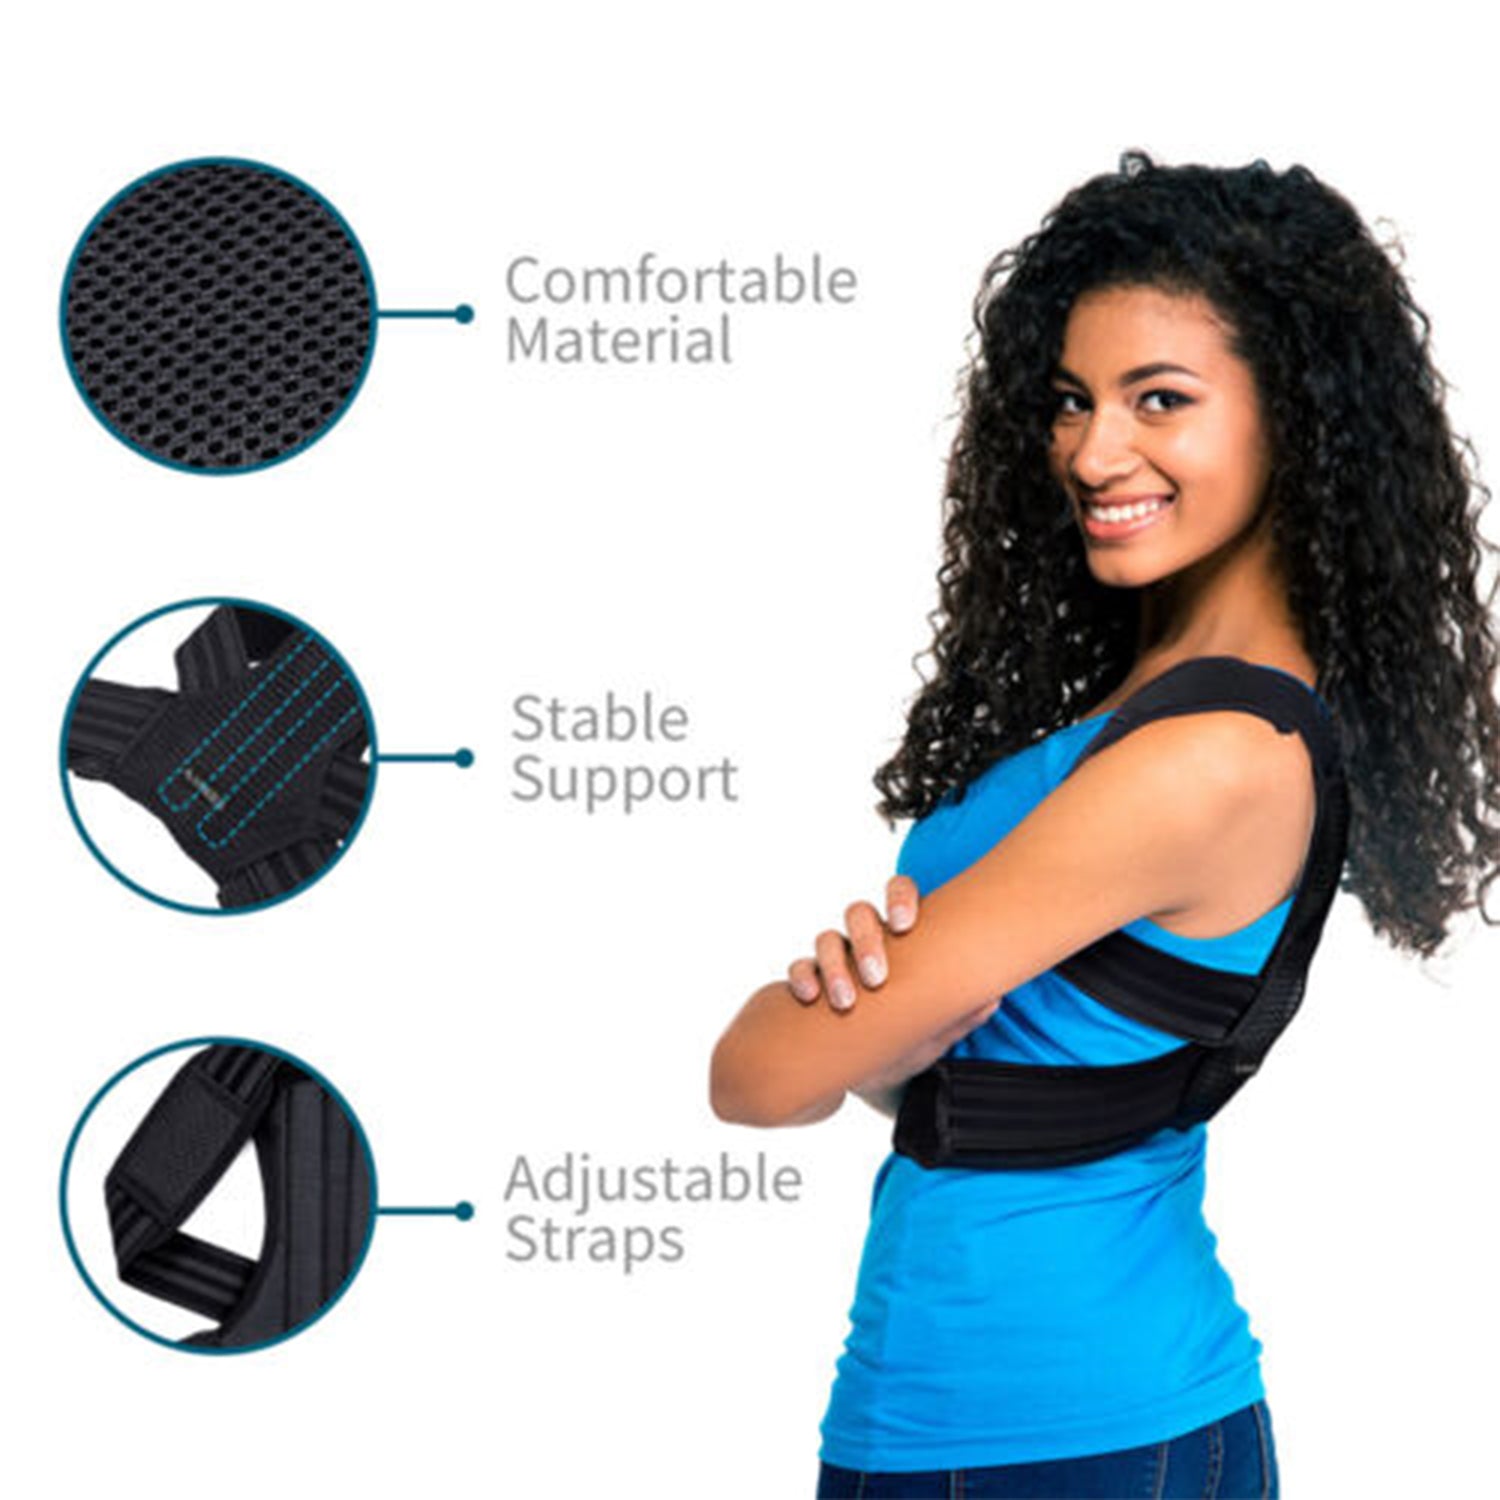 Adjustable Compression and Breathable Back Brace Lumbar Support Belt Wide  Protection for Gym, Posture, Lifting, Work, Pain Relief - China Back Brace  and Lumbar Support price